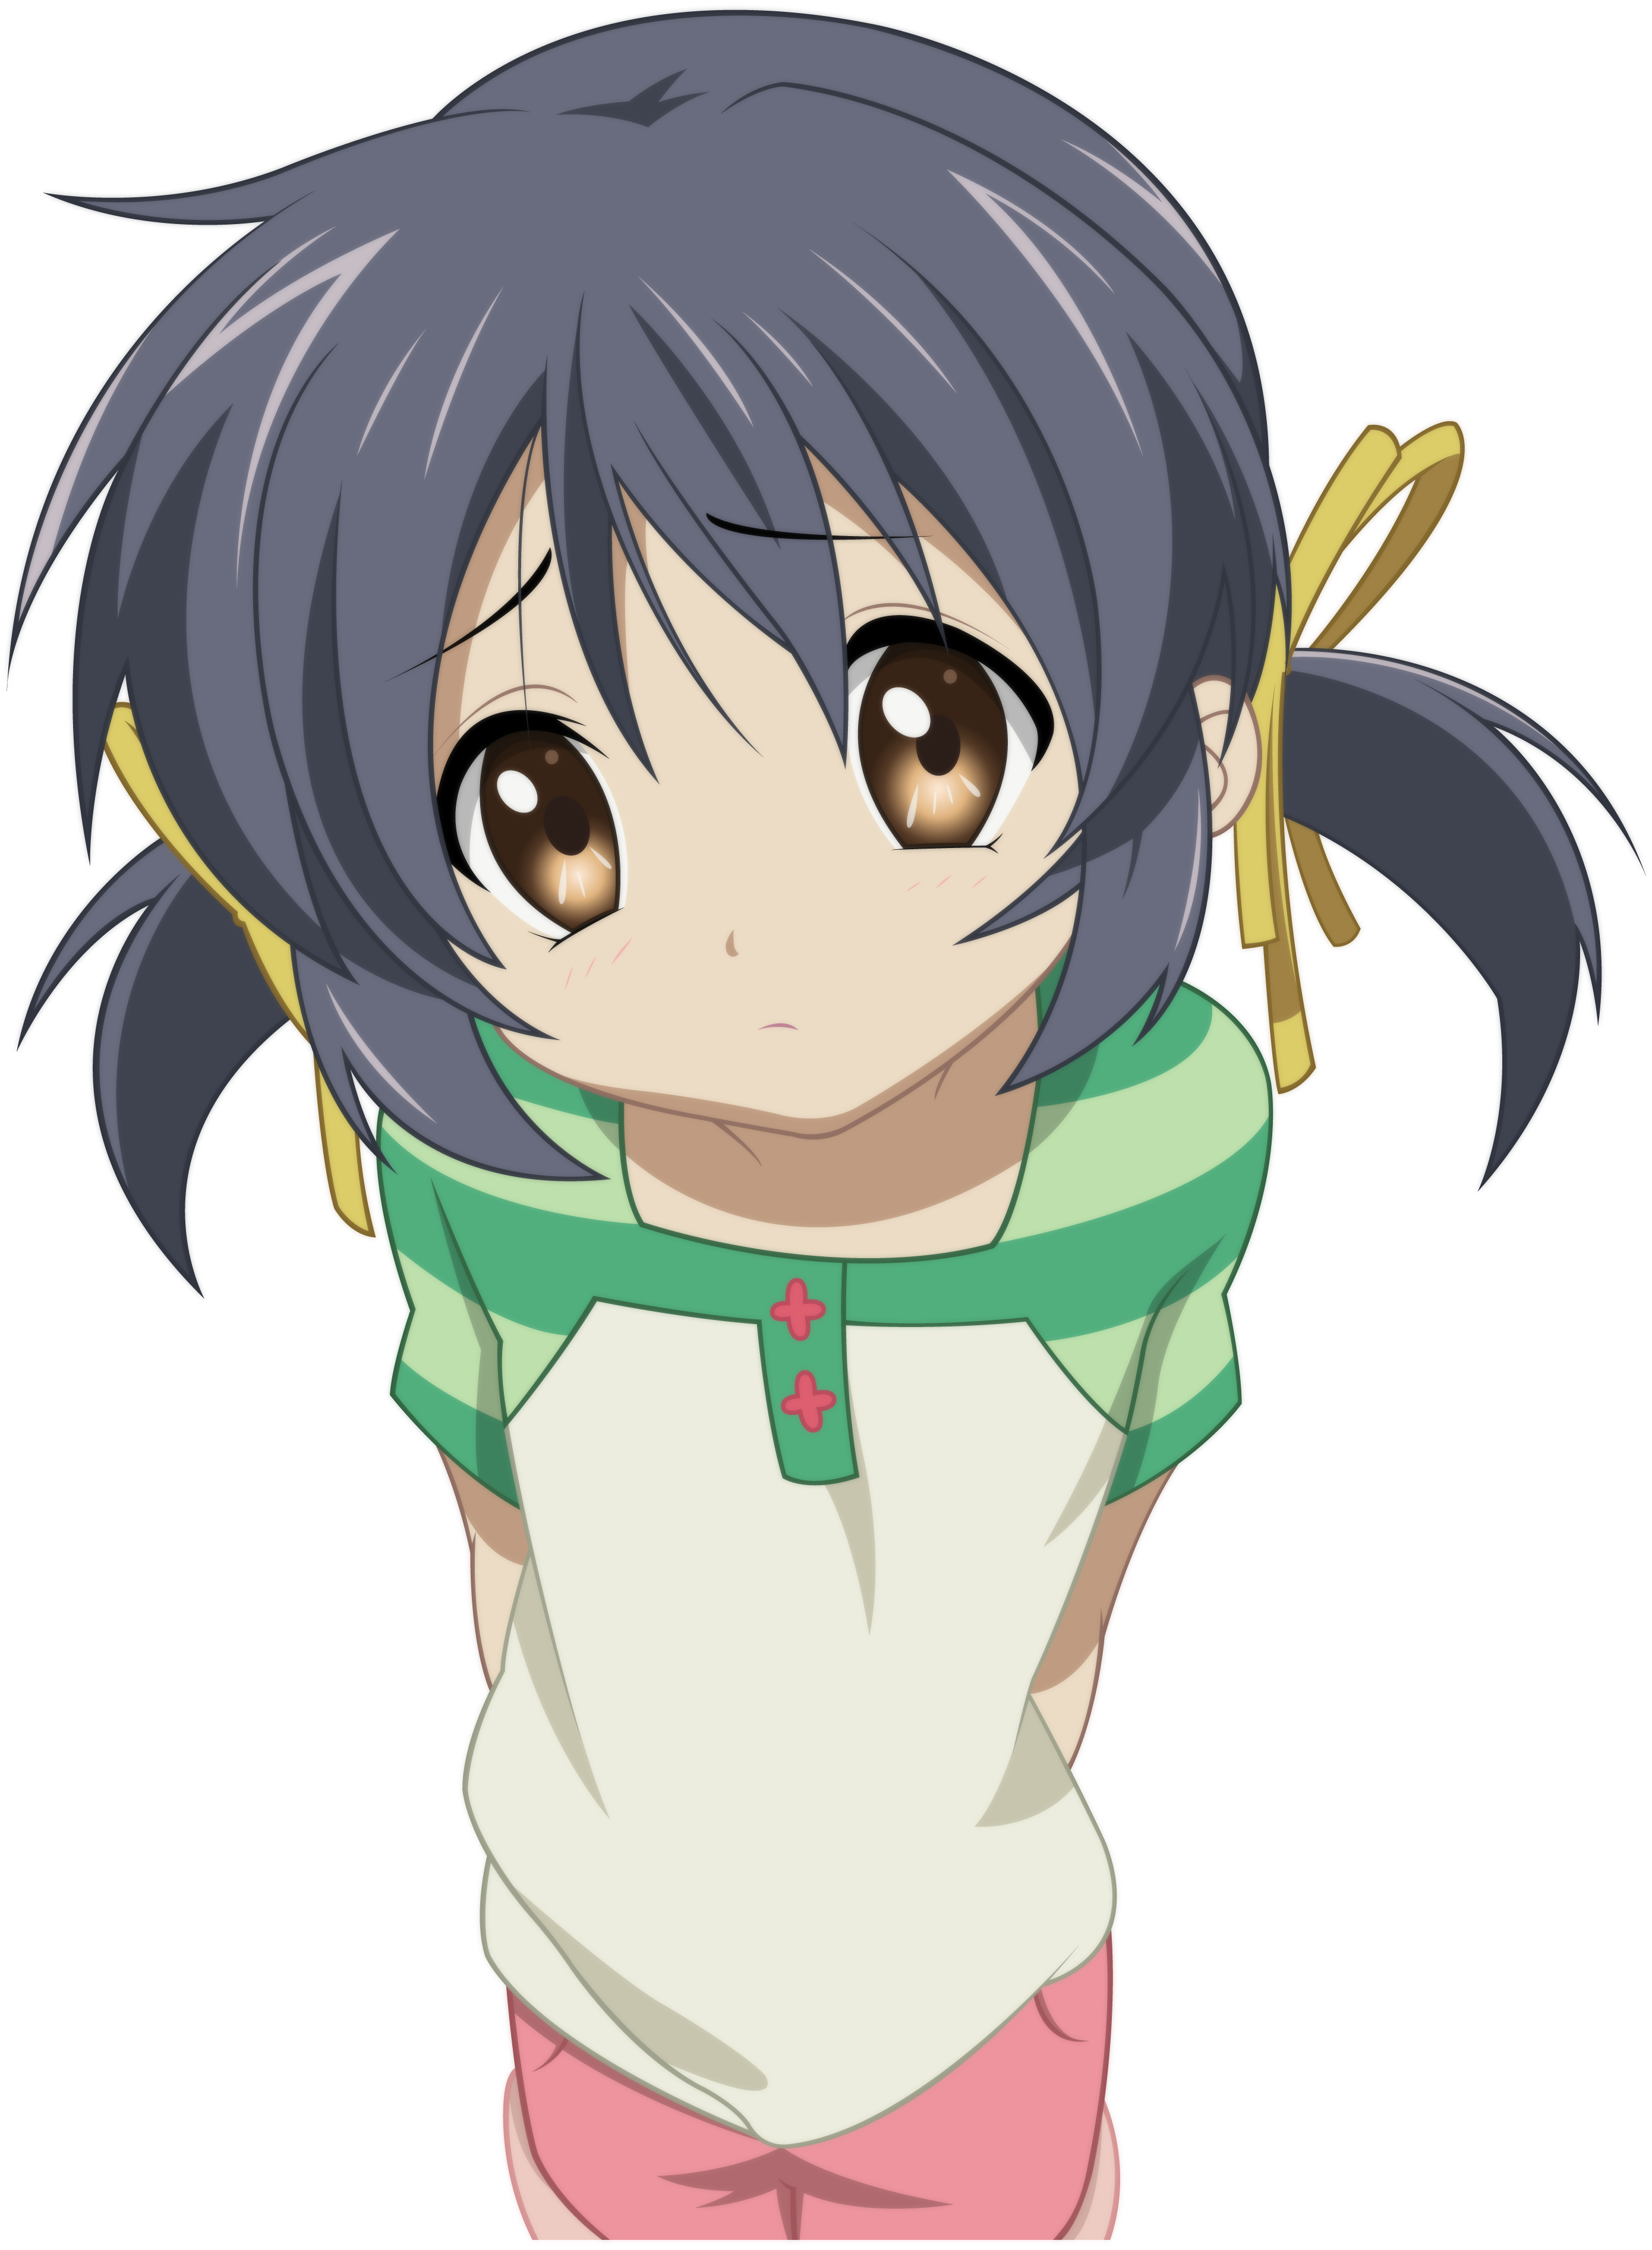 Characters of Clannad  Clannad, Clannad anime, Anime